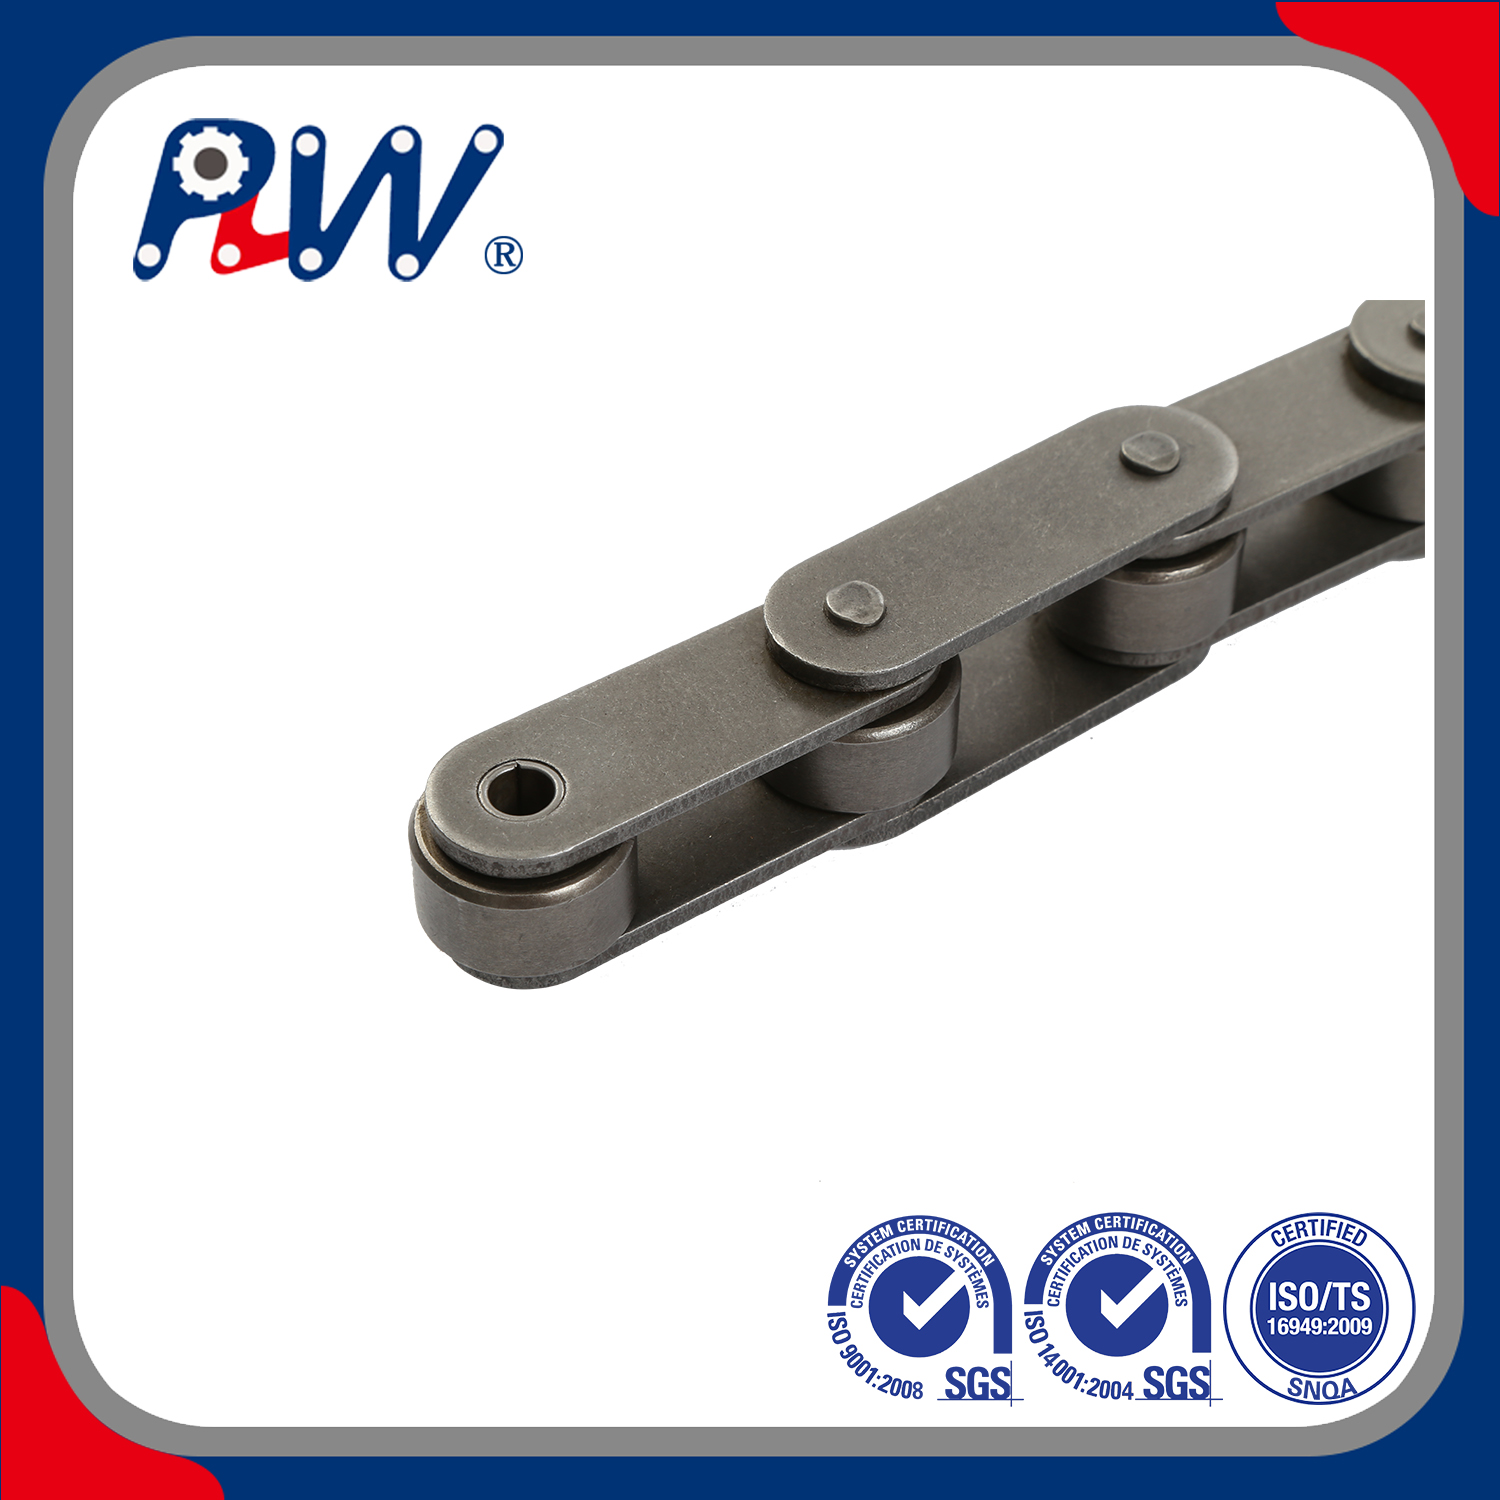 Competitive Price Double Pitch Conveyor Chain With Small Roller and Large Roller Type